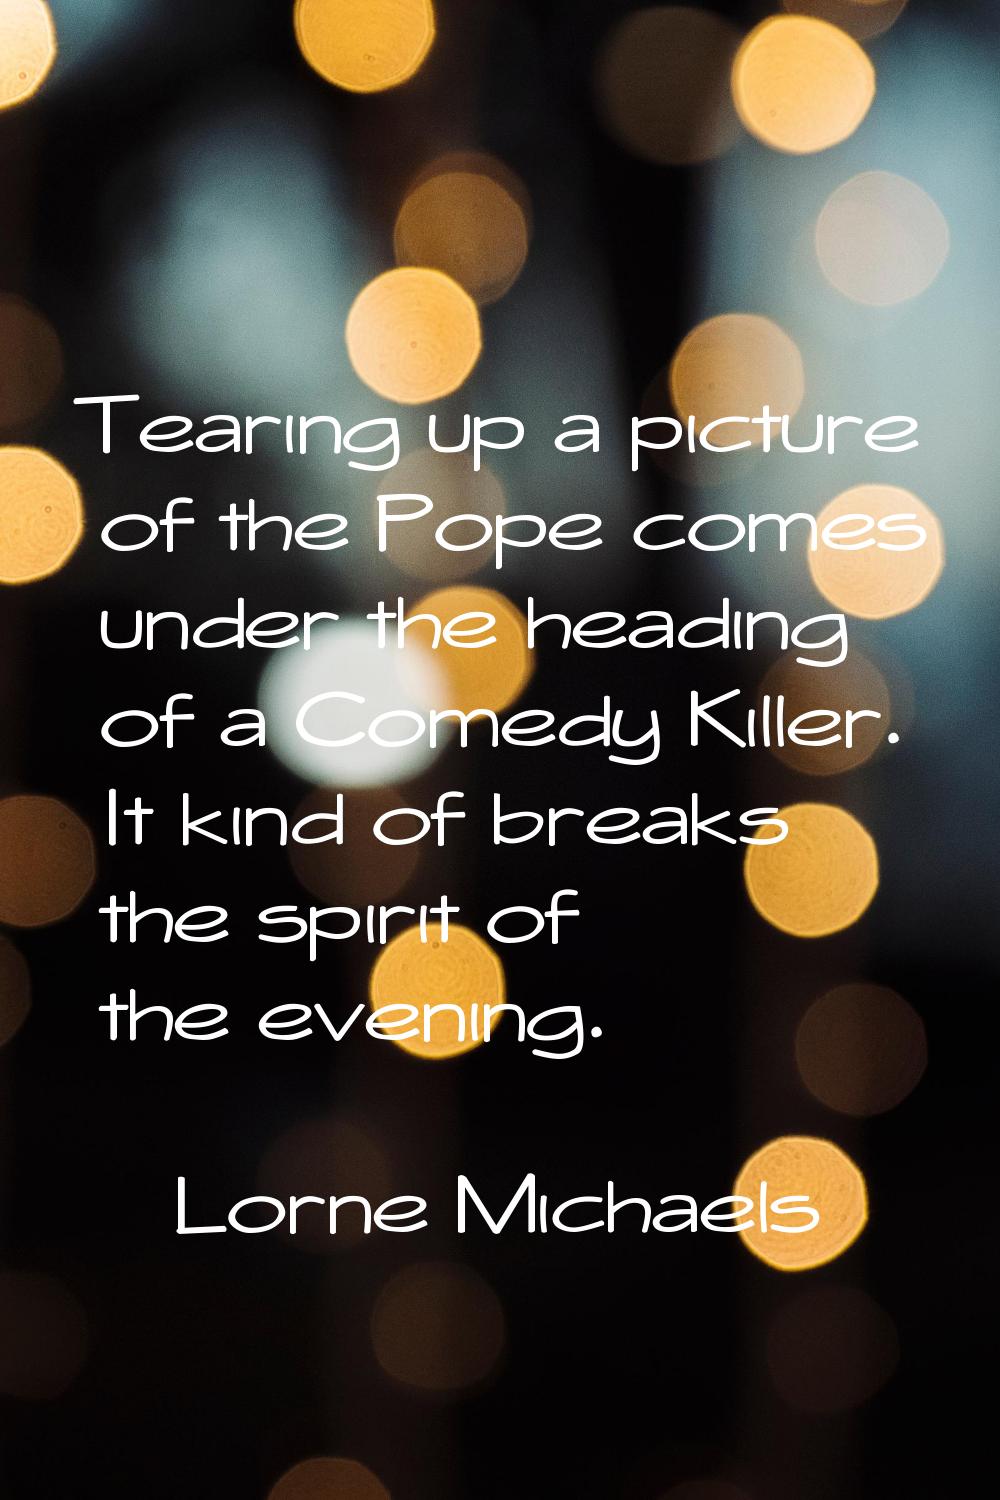 Tearing up a picture of the Pope comes under the heading of a Comedy Killer. It kind of breaks the 